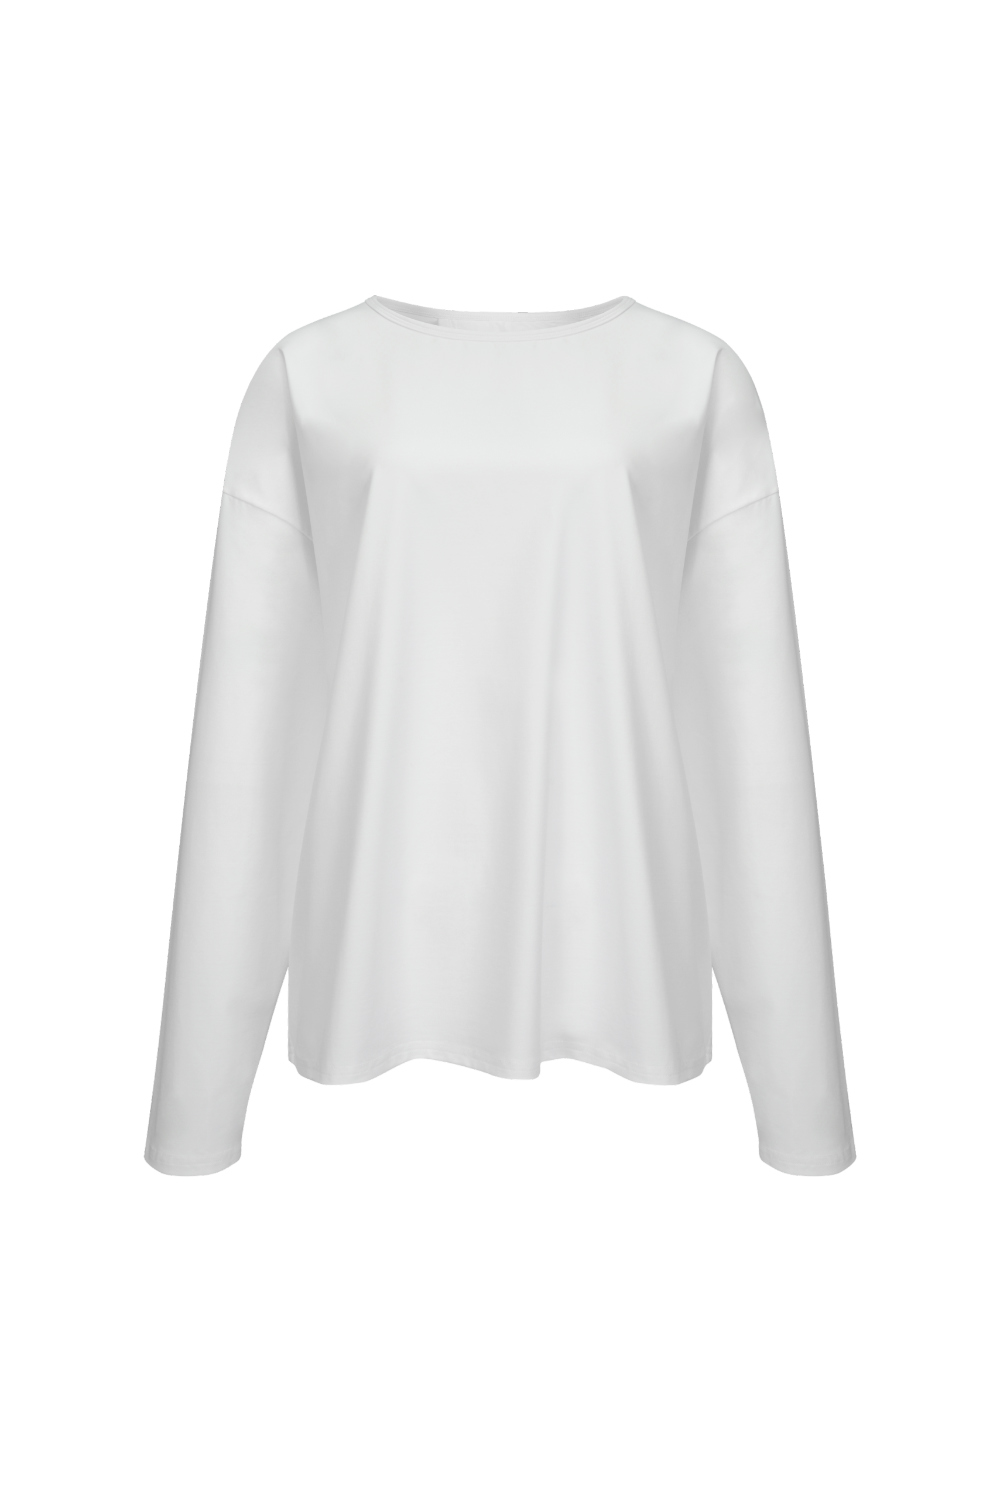 long sleeved tee white color image-S1L61